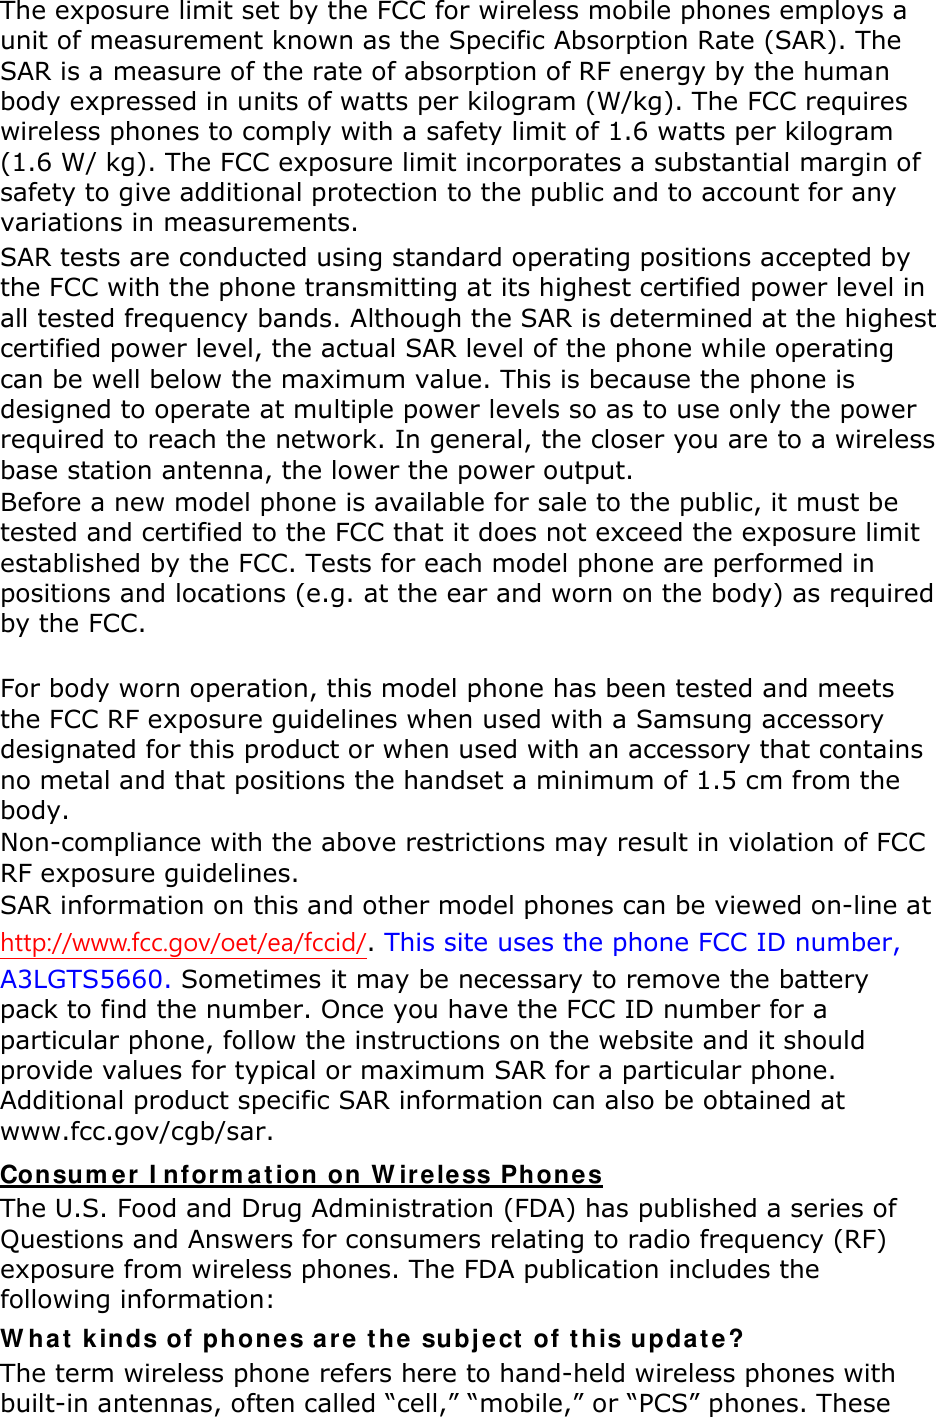 The exposure limit set by the FCC for wireless mobile phones employs a unit of measurement known as the Specific Absorption Rate (SAR). The SAR is a measure of the rate of absorption of RF energy by the human body expressed in units of watts per kilogram (W/kg). The FCC requires wireless phones to comply with a safety limit of 1.6 watts per kilogram (1.6 W/ kg). The FCC exposure limit incorporates a substantial margin of safety to give additional protection to the public and to account for any variations in measurements. SAR tests are conducted using standard operating positions accepted by the FCC with the phone transmitting at its highest certified power level in all tested frequency bands. Although the SAR is determined at the highest certified power level, the actual SAR level of the phone while operating can be well below the maximum value. This is because the phone is designed to operate at multiple power levels so as to use only the power required to reach the network. In general, the closer you are to a wireless base station antenna, the lower the power output. Before a new model phone is available for sale to the public, it must be tested and certified to the FCC that it does not exceed the exposure limit established by the FCC. Tests for each model phone are performed in positions and locations (e.g. at the ear and worn on the body) as required by the FCC.      For body worn operation, this model phone has been tested and meets the FCC RF exposure guidelines when used with a Samsung accessory designated for this product or when used with an accessory that contains no metal and that positions the handset a minimum of 1.5 cm from the body.   Non-compliance with the above restrictions may result in violation of FCC RF exposure guidelines. SAR information on this and other model phones can be viewed on-line at http://www.fcc.gov/oet/ea/fccid/. This site uses the phone FCC ID number, A3LGTS5660. Sometimes it may be necessary to remove the battery pack to find the number. Once you have the FCC ID number for a particular phone, follow the instructions on the website and it should provide values for typical or maximum SAR for a particular phone. Additional product specific SAR information can also be obtained at www.fcc.gov/cgb/sar. Con sum er  I nform ation on W ireless Phone s The U.S. Food and Drug Administration (FDA) has published a series of Questions and Answers for consumers relating to radio frequency (RF) exposure from wireless phones. The FDA publication includes the following information: W hat  k inds of phones a r e t he subj e ct  of t his u pdat e ? The term wireless phone refers here to hand-held wireless phones with built-in antennas, often called “cell,” “mobile,” or “PCS” phones. These 